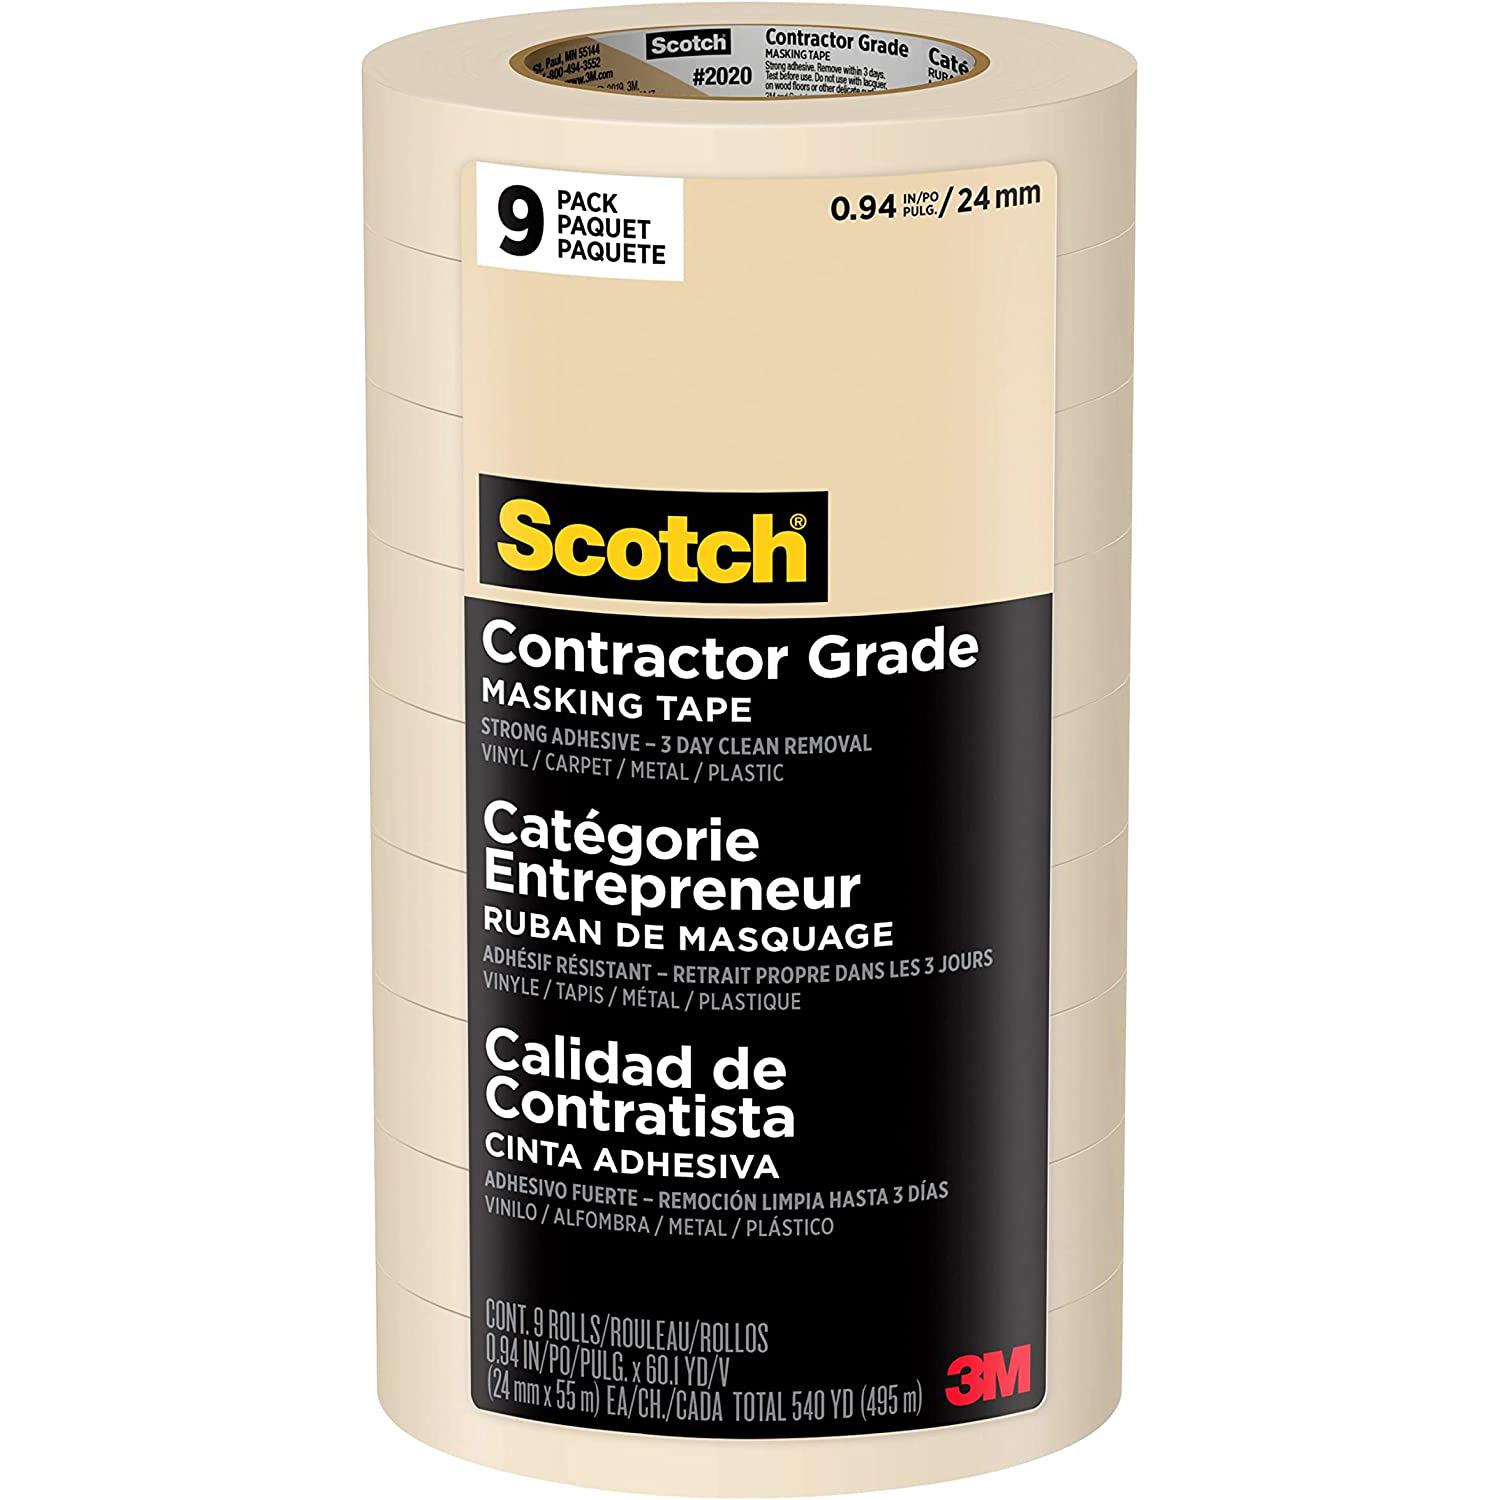 Scotch Contractor Grade Masking Tape 9 Pack for $13.18